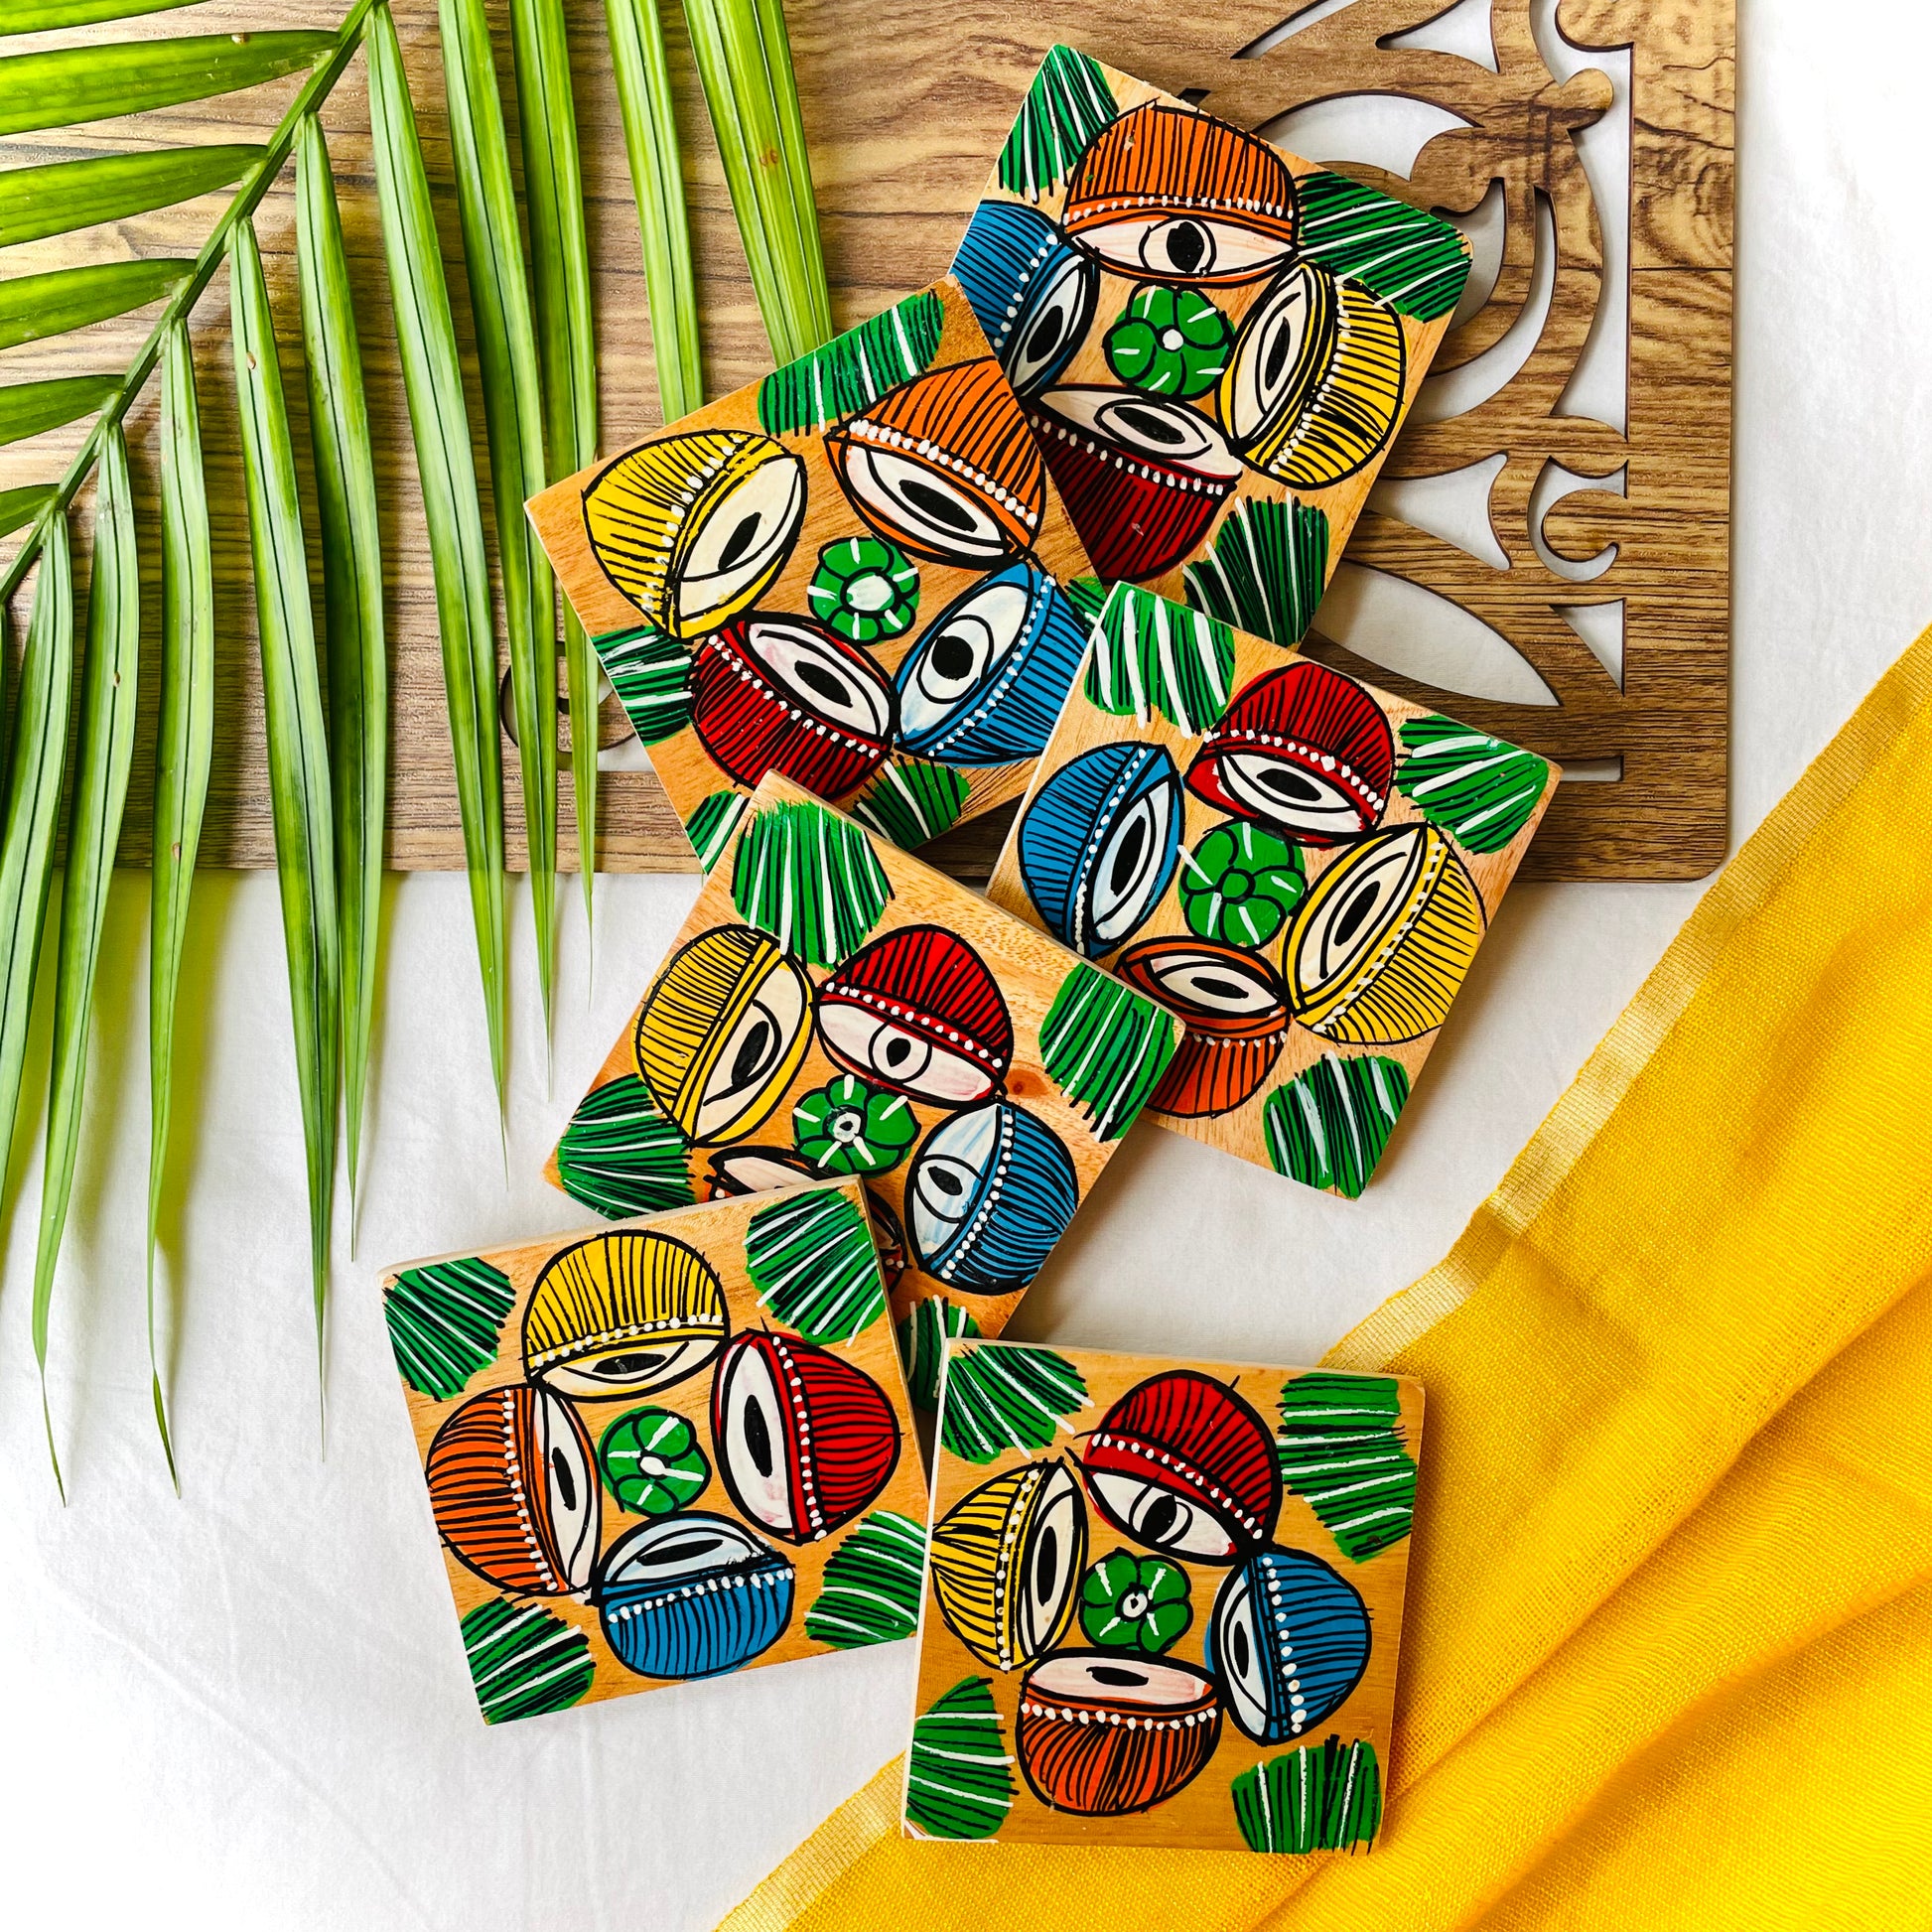 Six pure mango wood square wood coasters painted with four tablas, a type of Indian classical musical instrument in each wood coaster are placed on a wood tray with leaves in the background